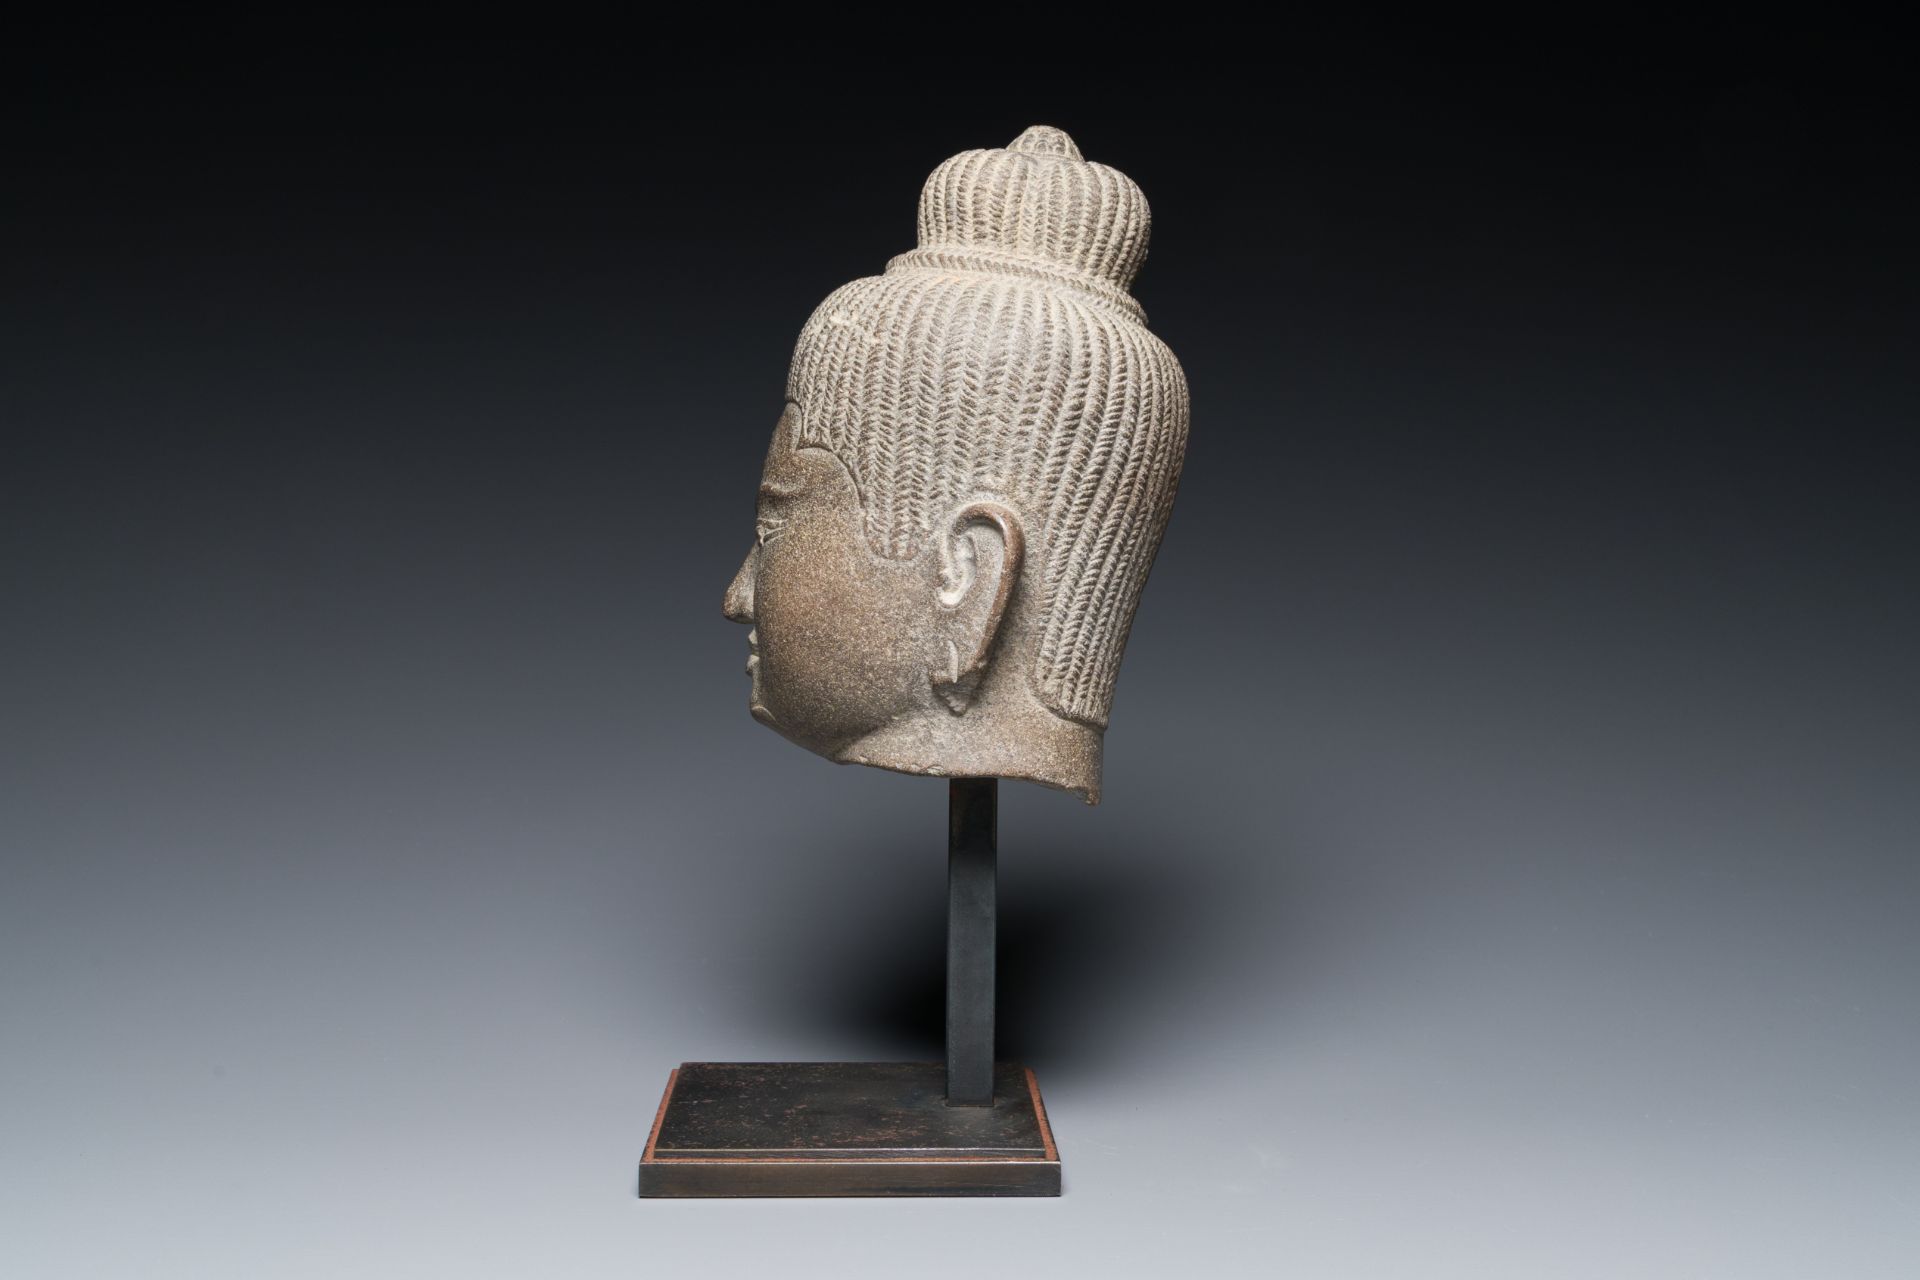 A Khmer polished sandstone head of Uma in Baphuon-style, Angkor period, Cambodia, 11th C. - Image 5 of 15